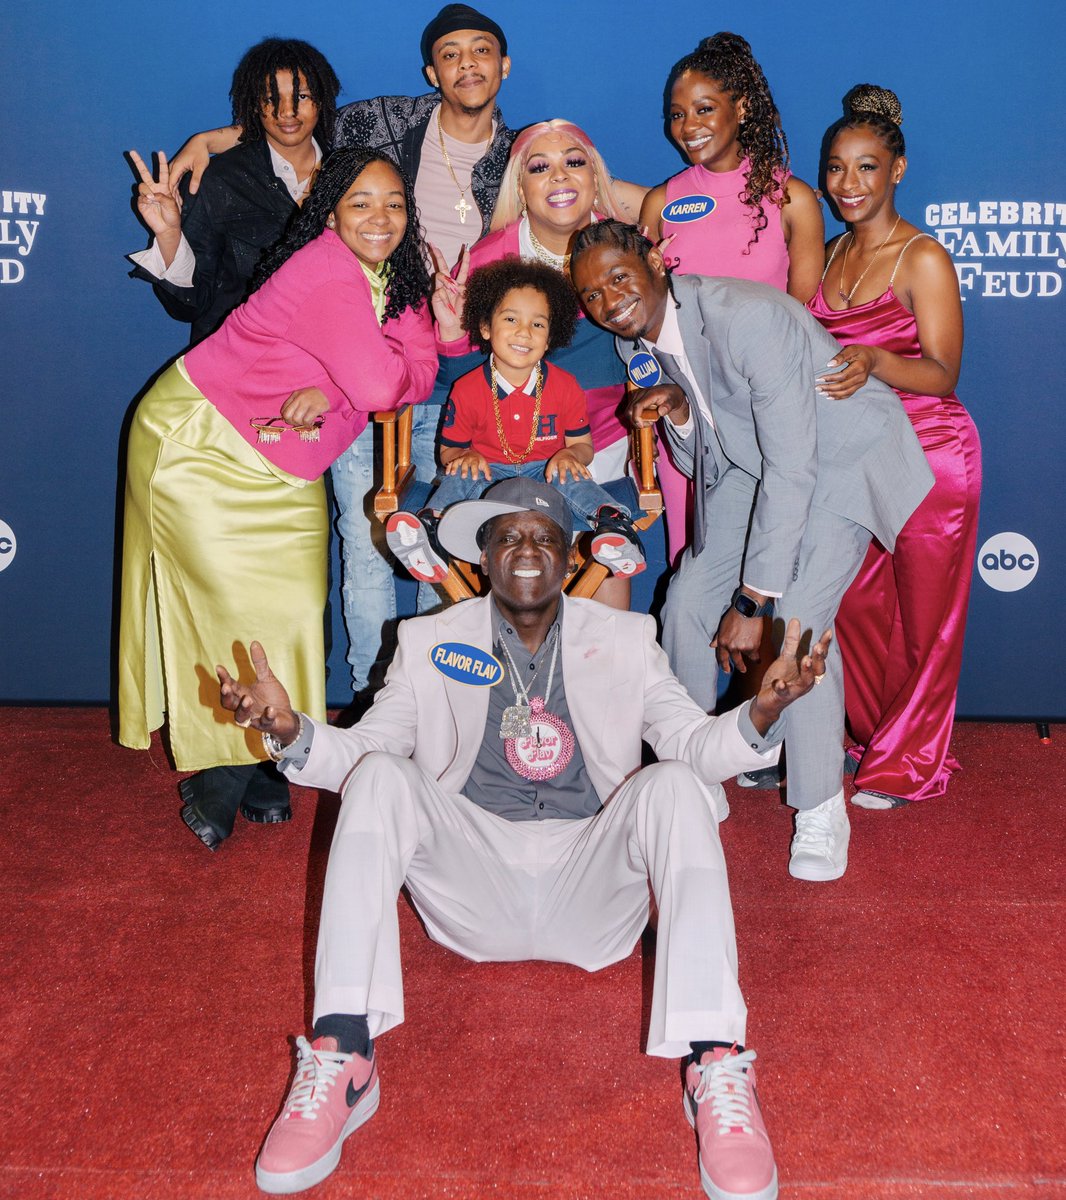 Flavor Flav looking great With all of his 8